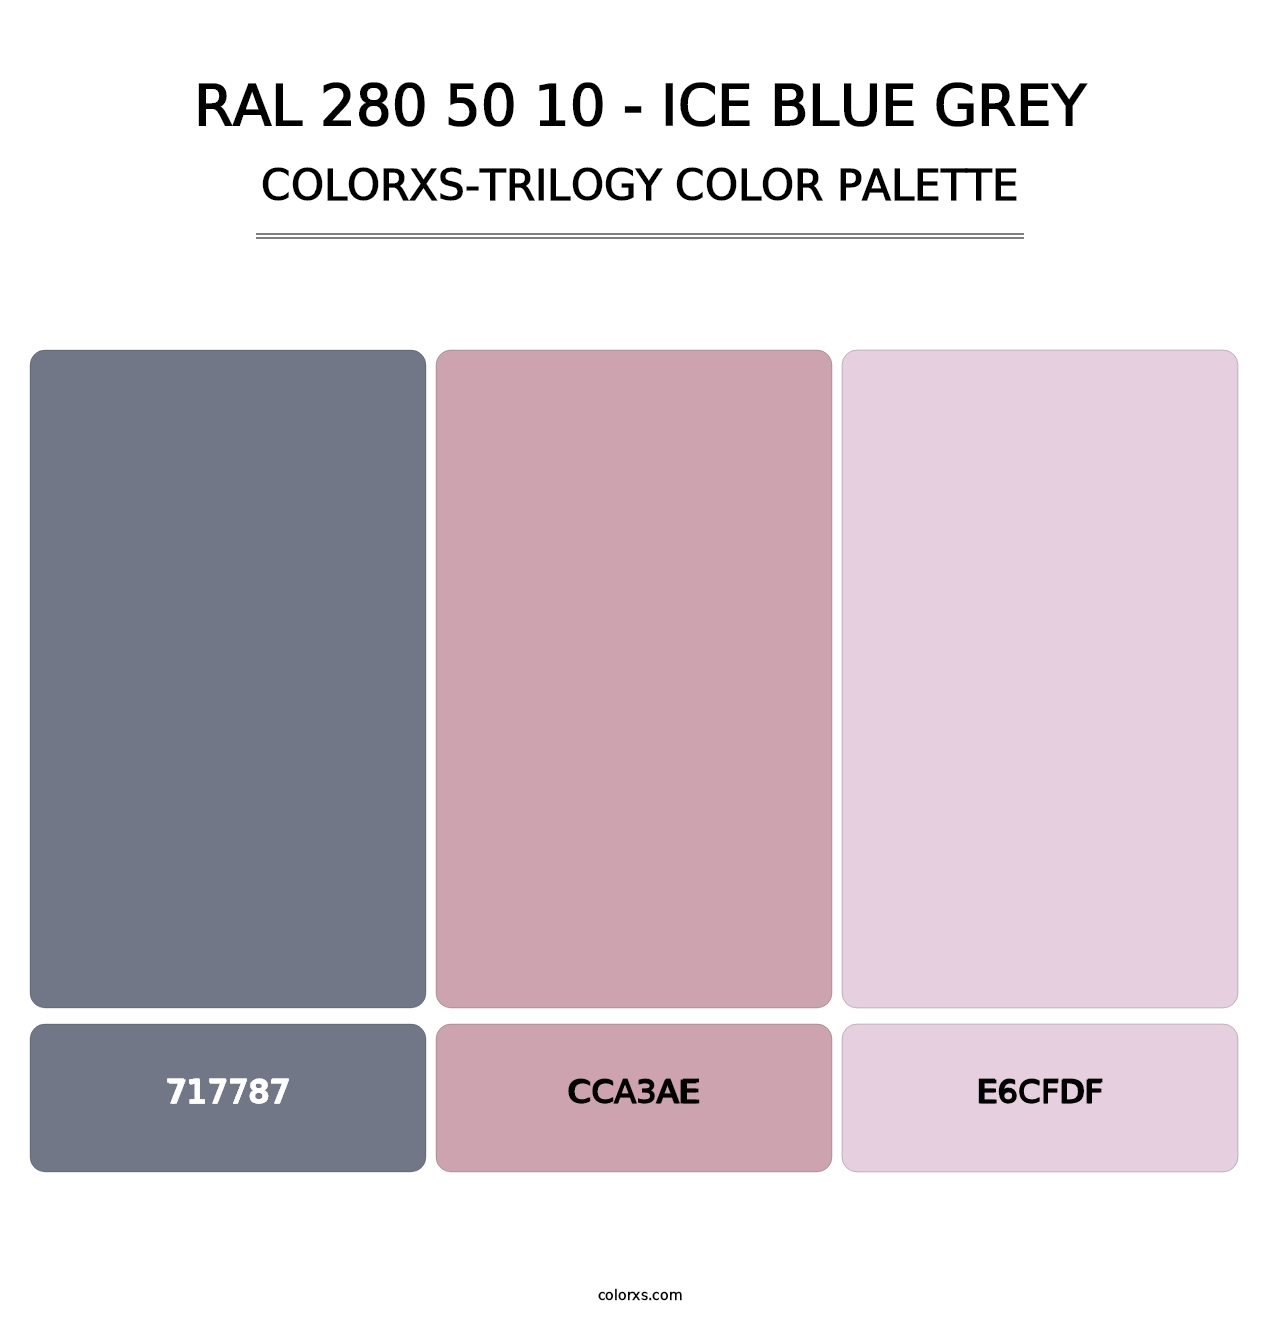 RAL 280 50 10 - Ice Blue Grey - Colorxs Trilogy Palette